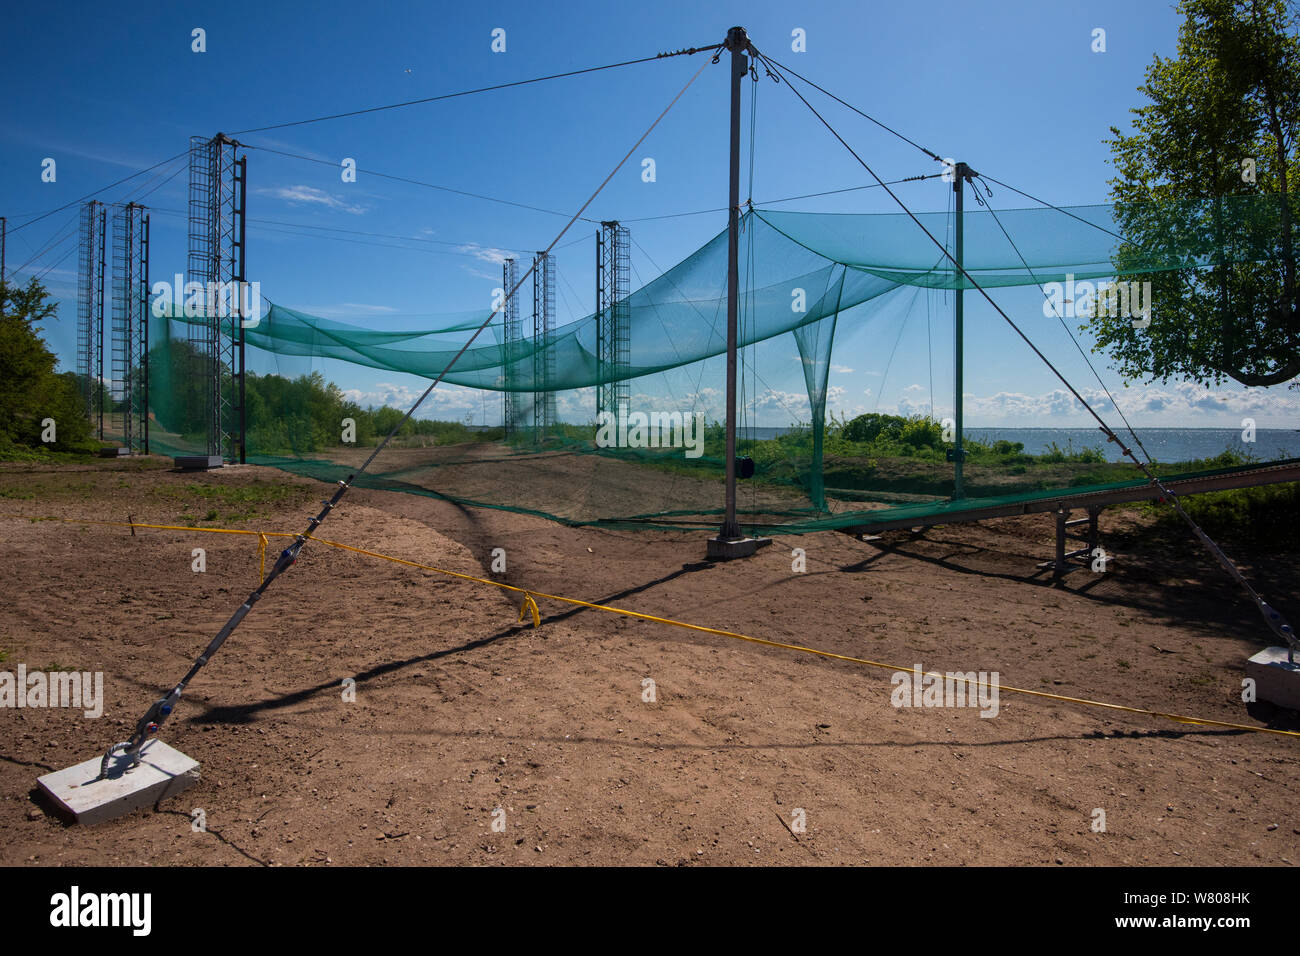 Heligoland bird trap, at the Ventes Ragas bird ringing station, one of the most modern in the world, Nemunas River Delta, Lithuania, May 2015. Stock Photo